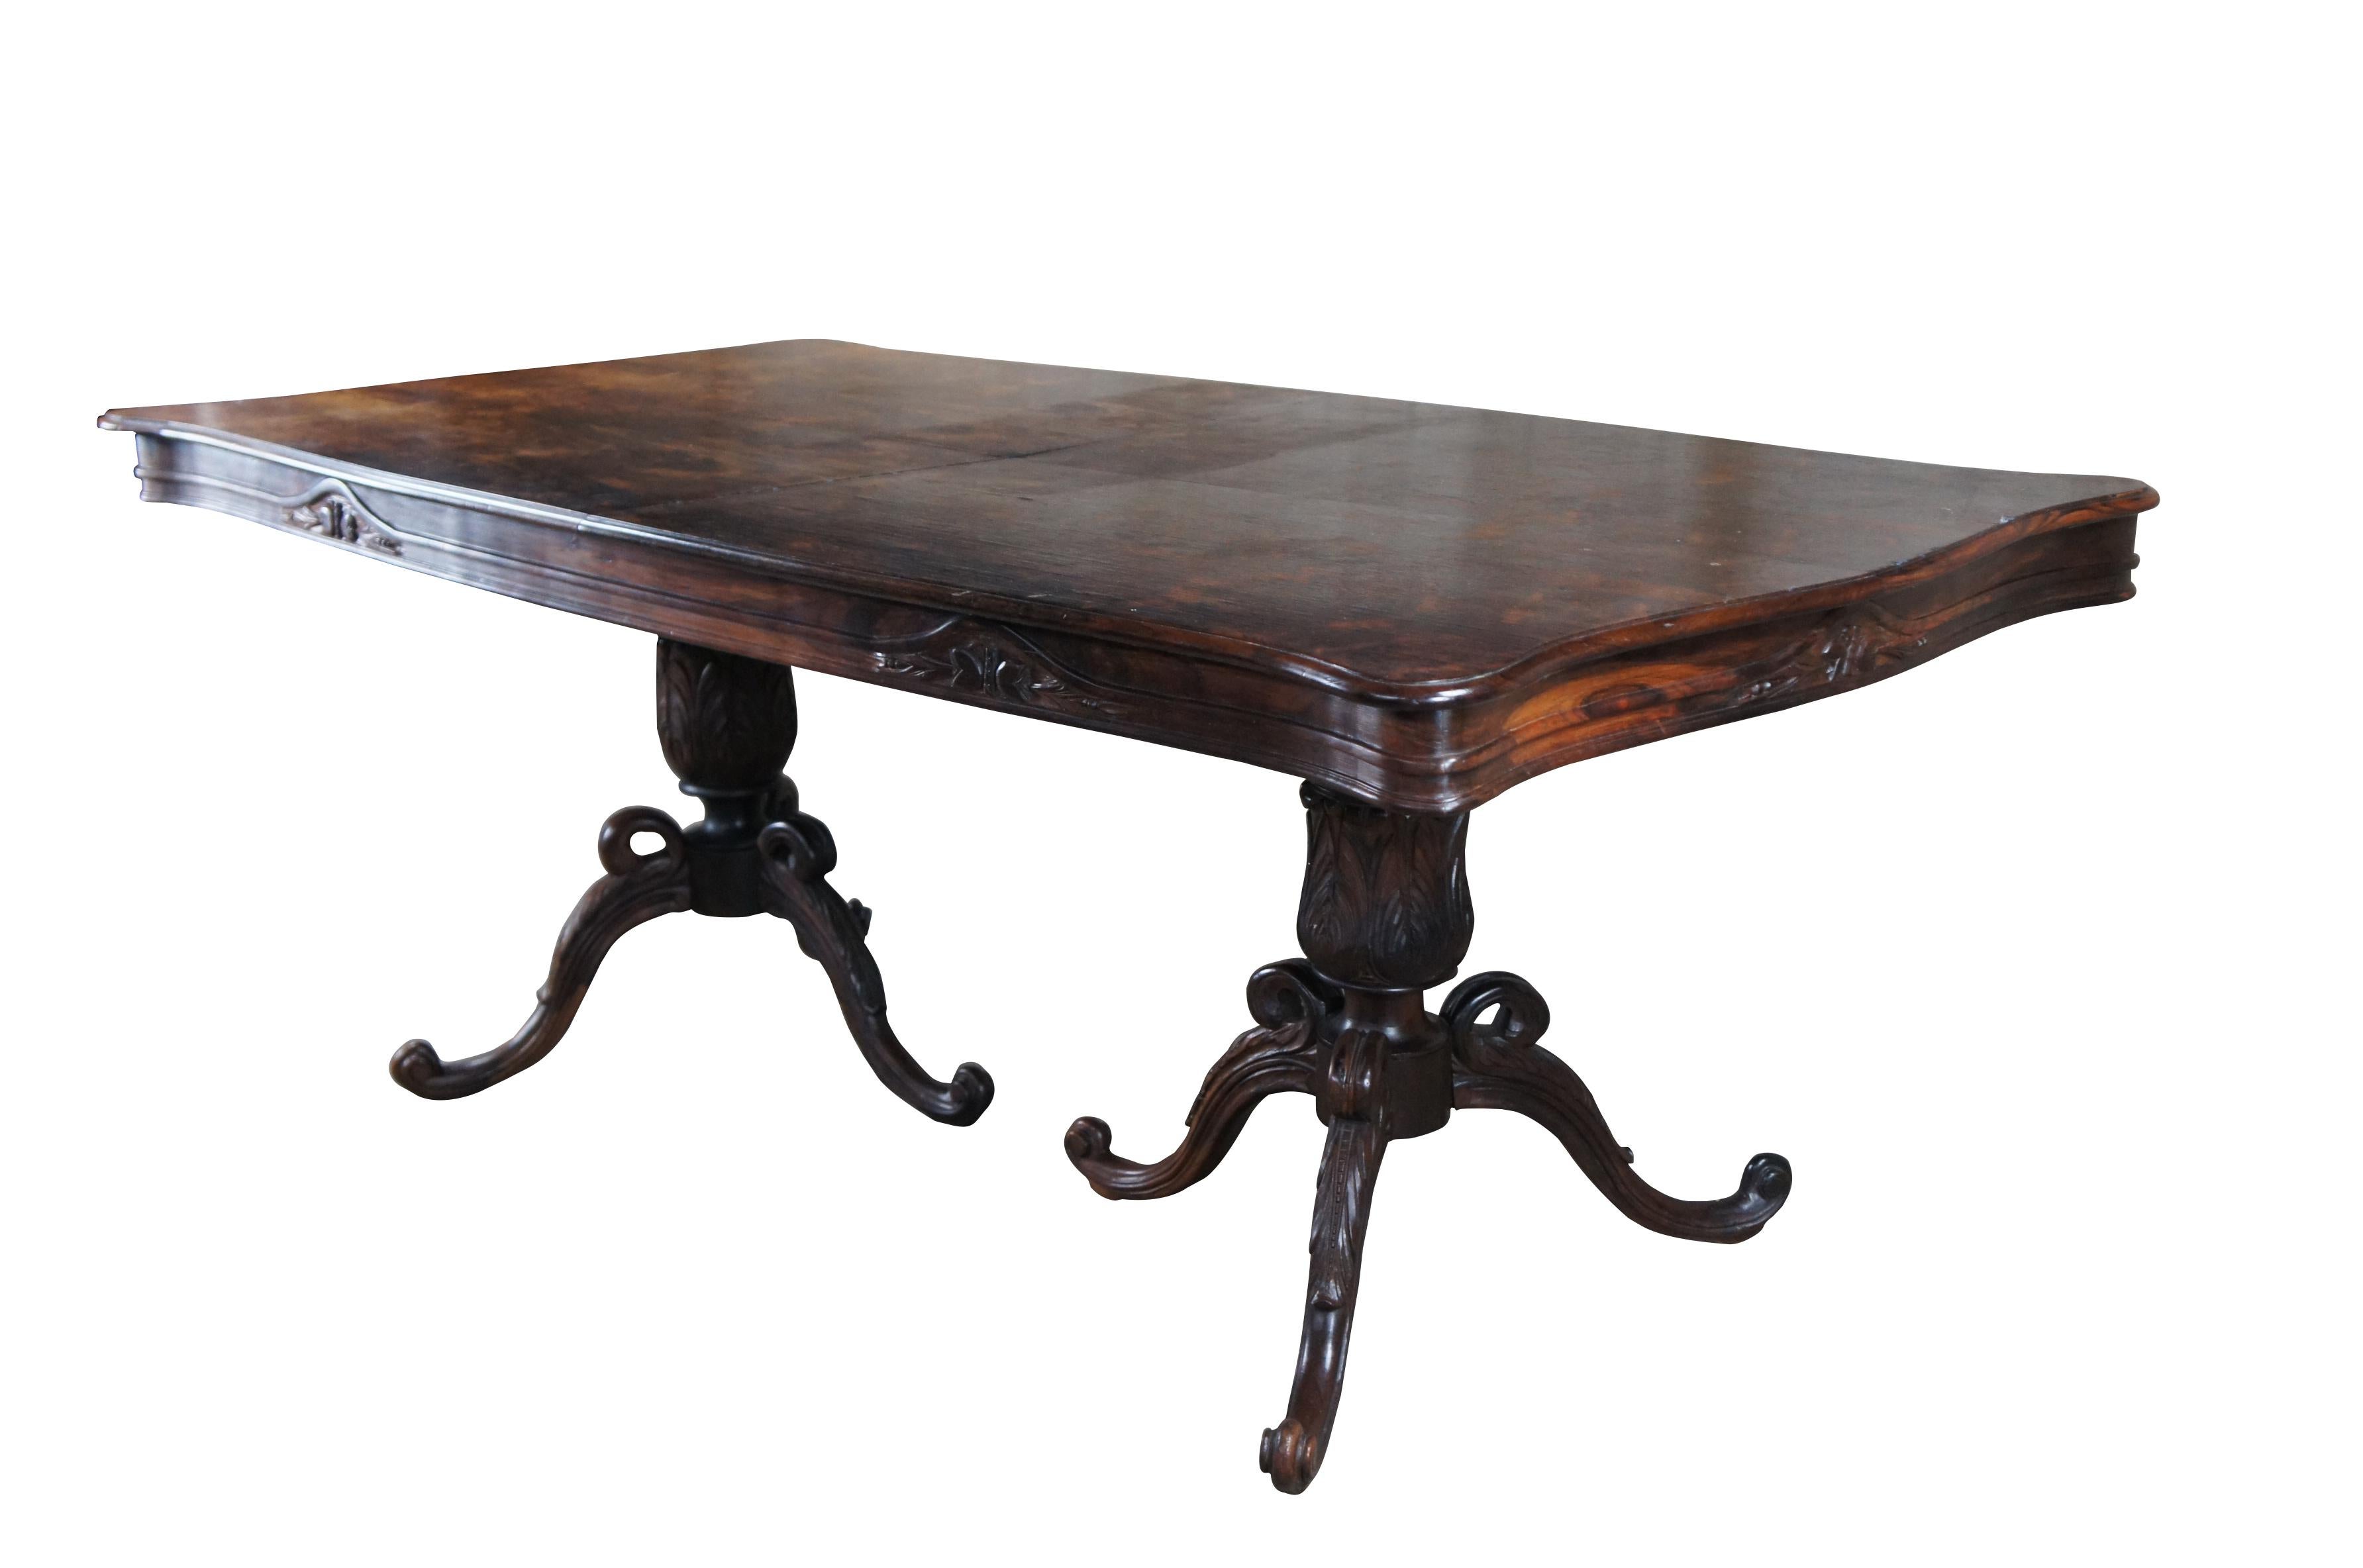 Mid century Brazilian Rosewood (Jacaranda) dining table, circa 1960s. Features rectangular serpentine form with double pedestal tri foot base, carved acanthus and floral motif and one extendable leaf.


Dimensions:
39